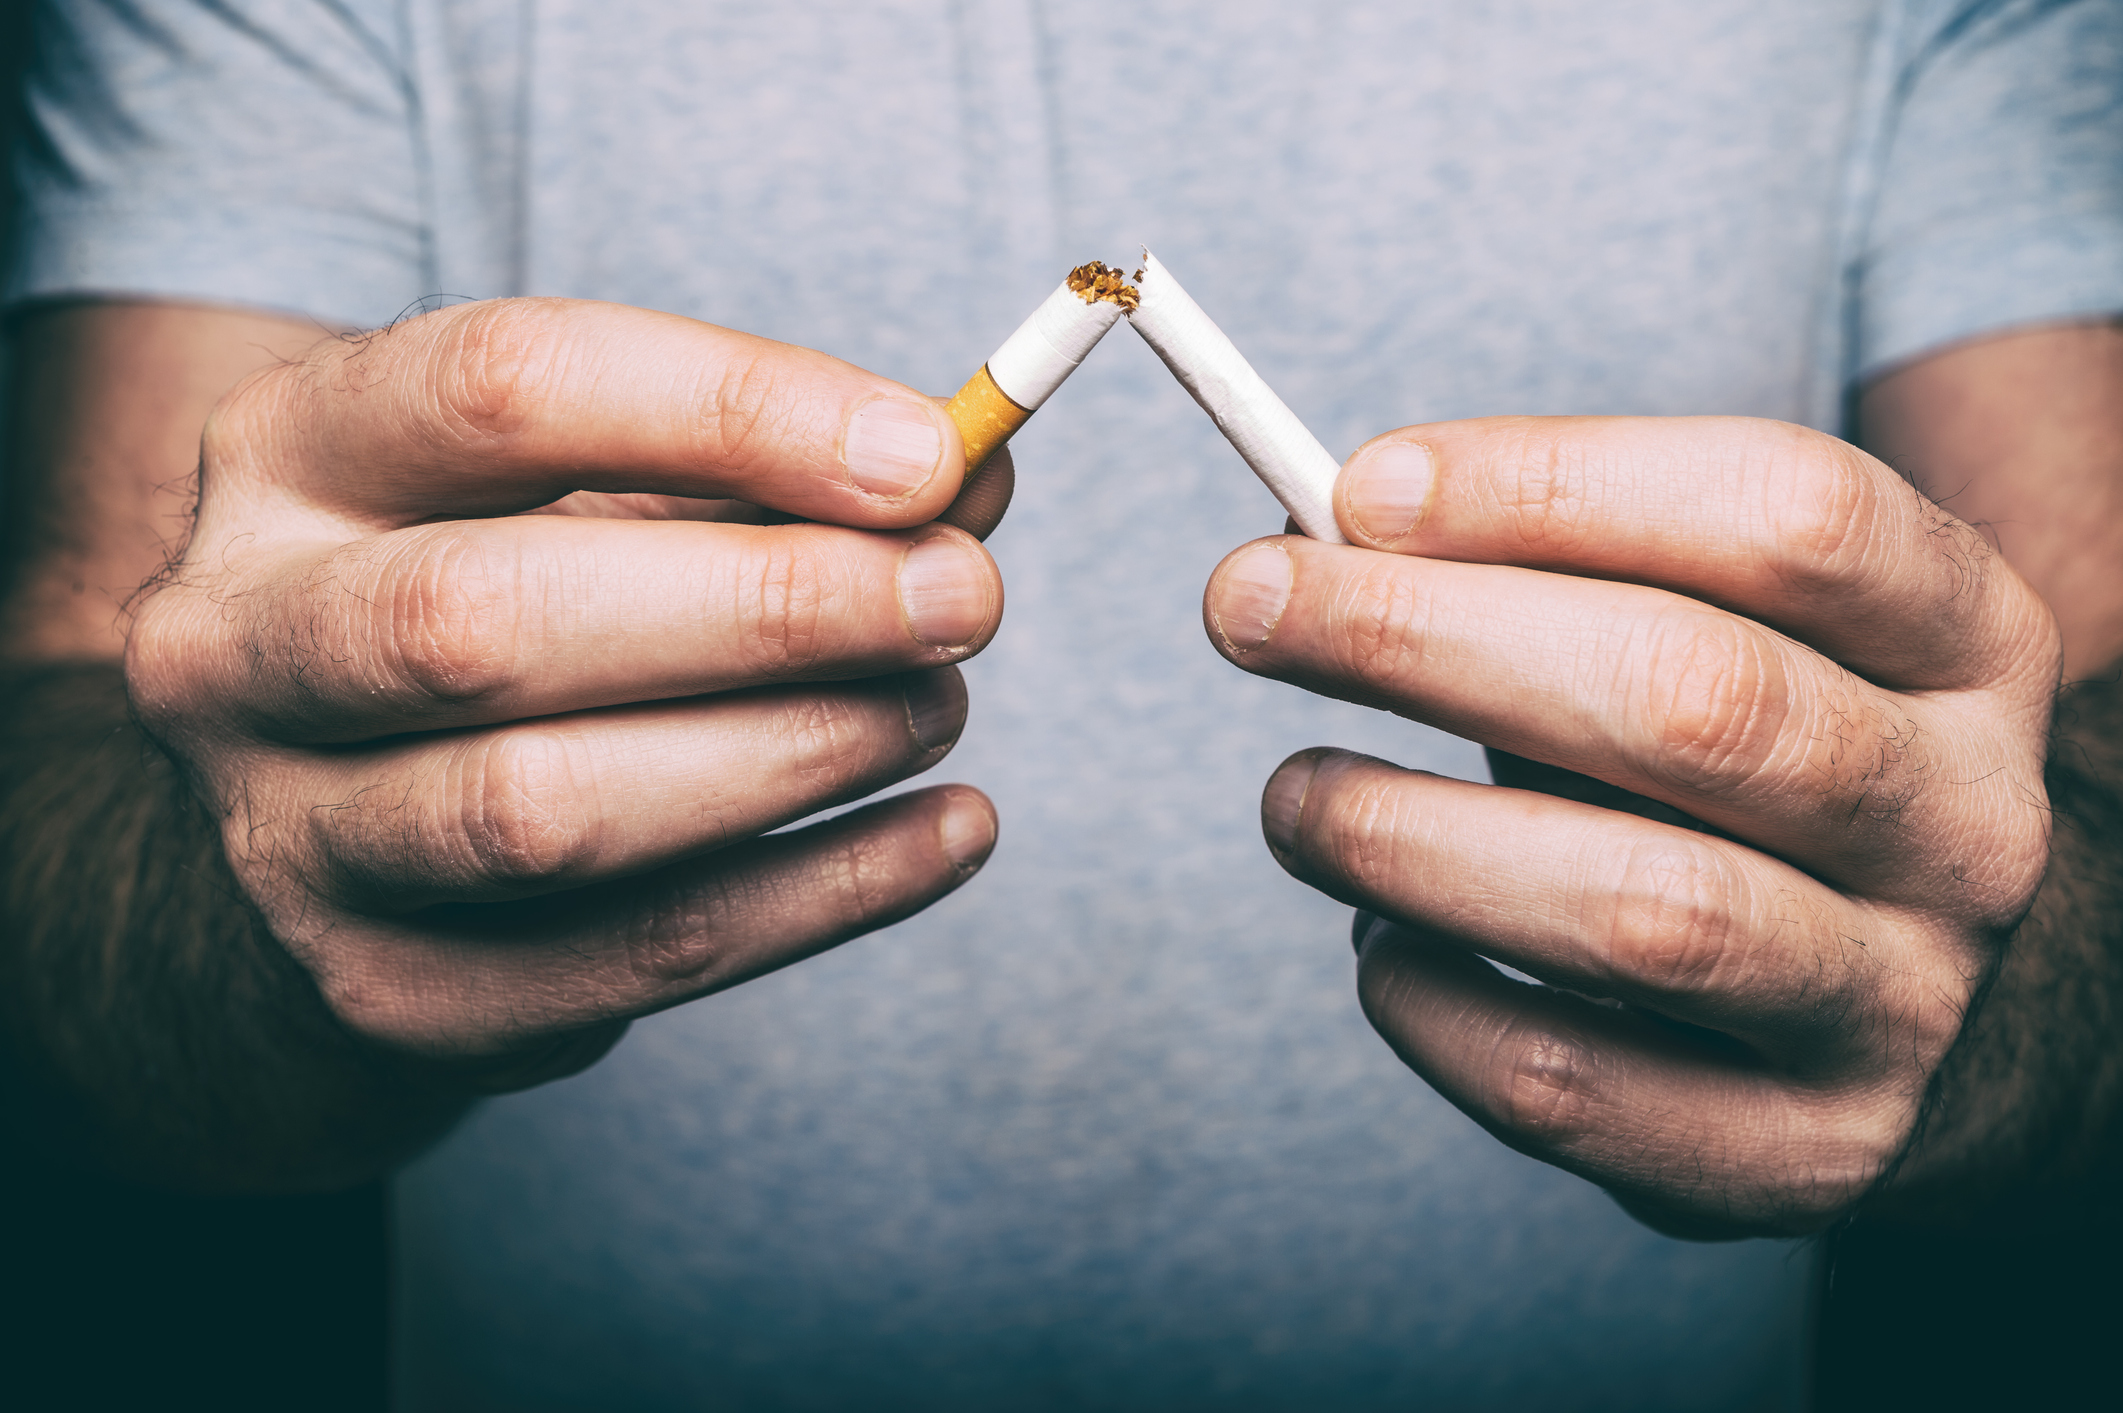 By 2030, Tobacco-Related Deaths Projected to Increase to 8 Million